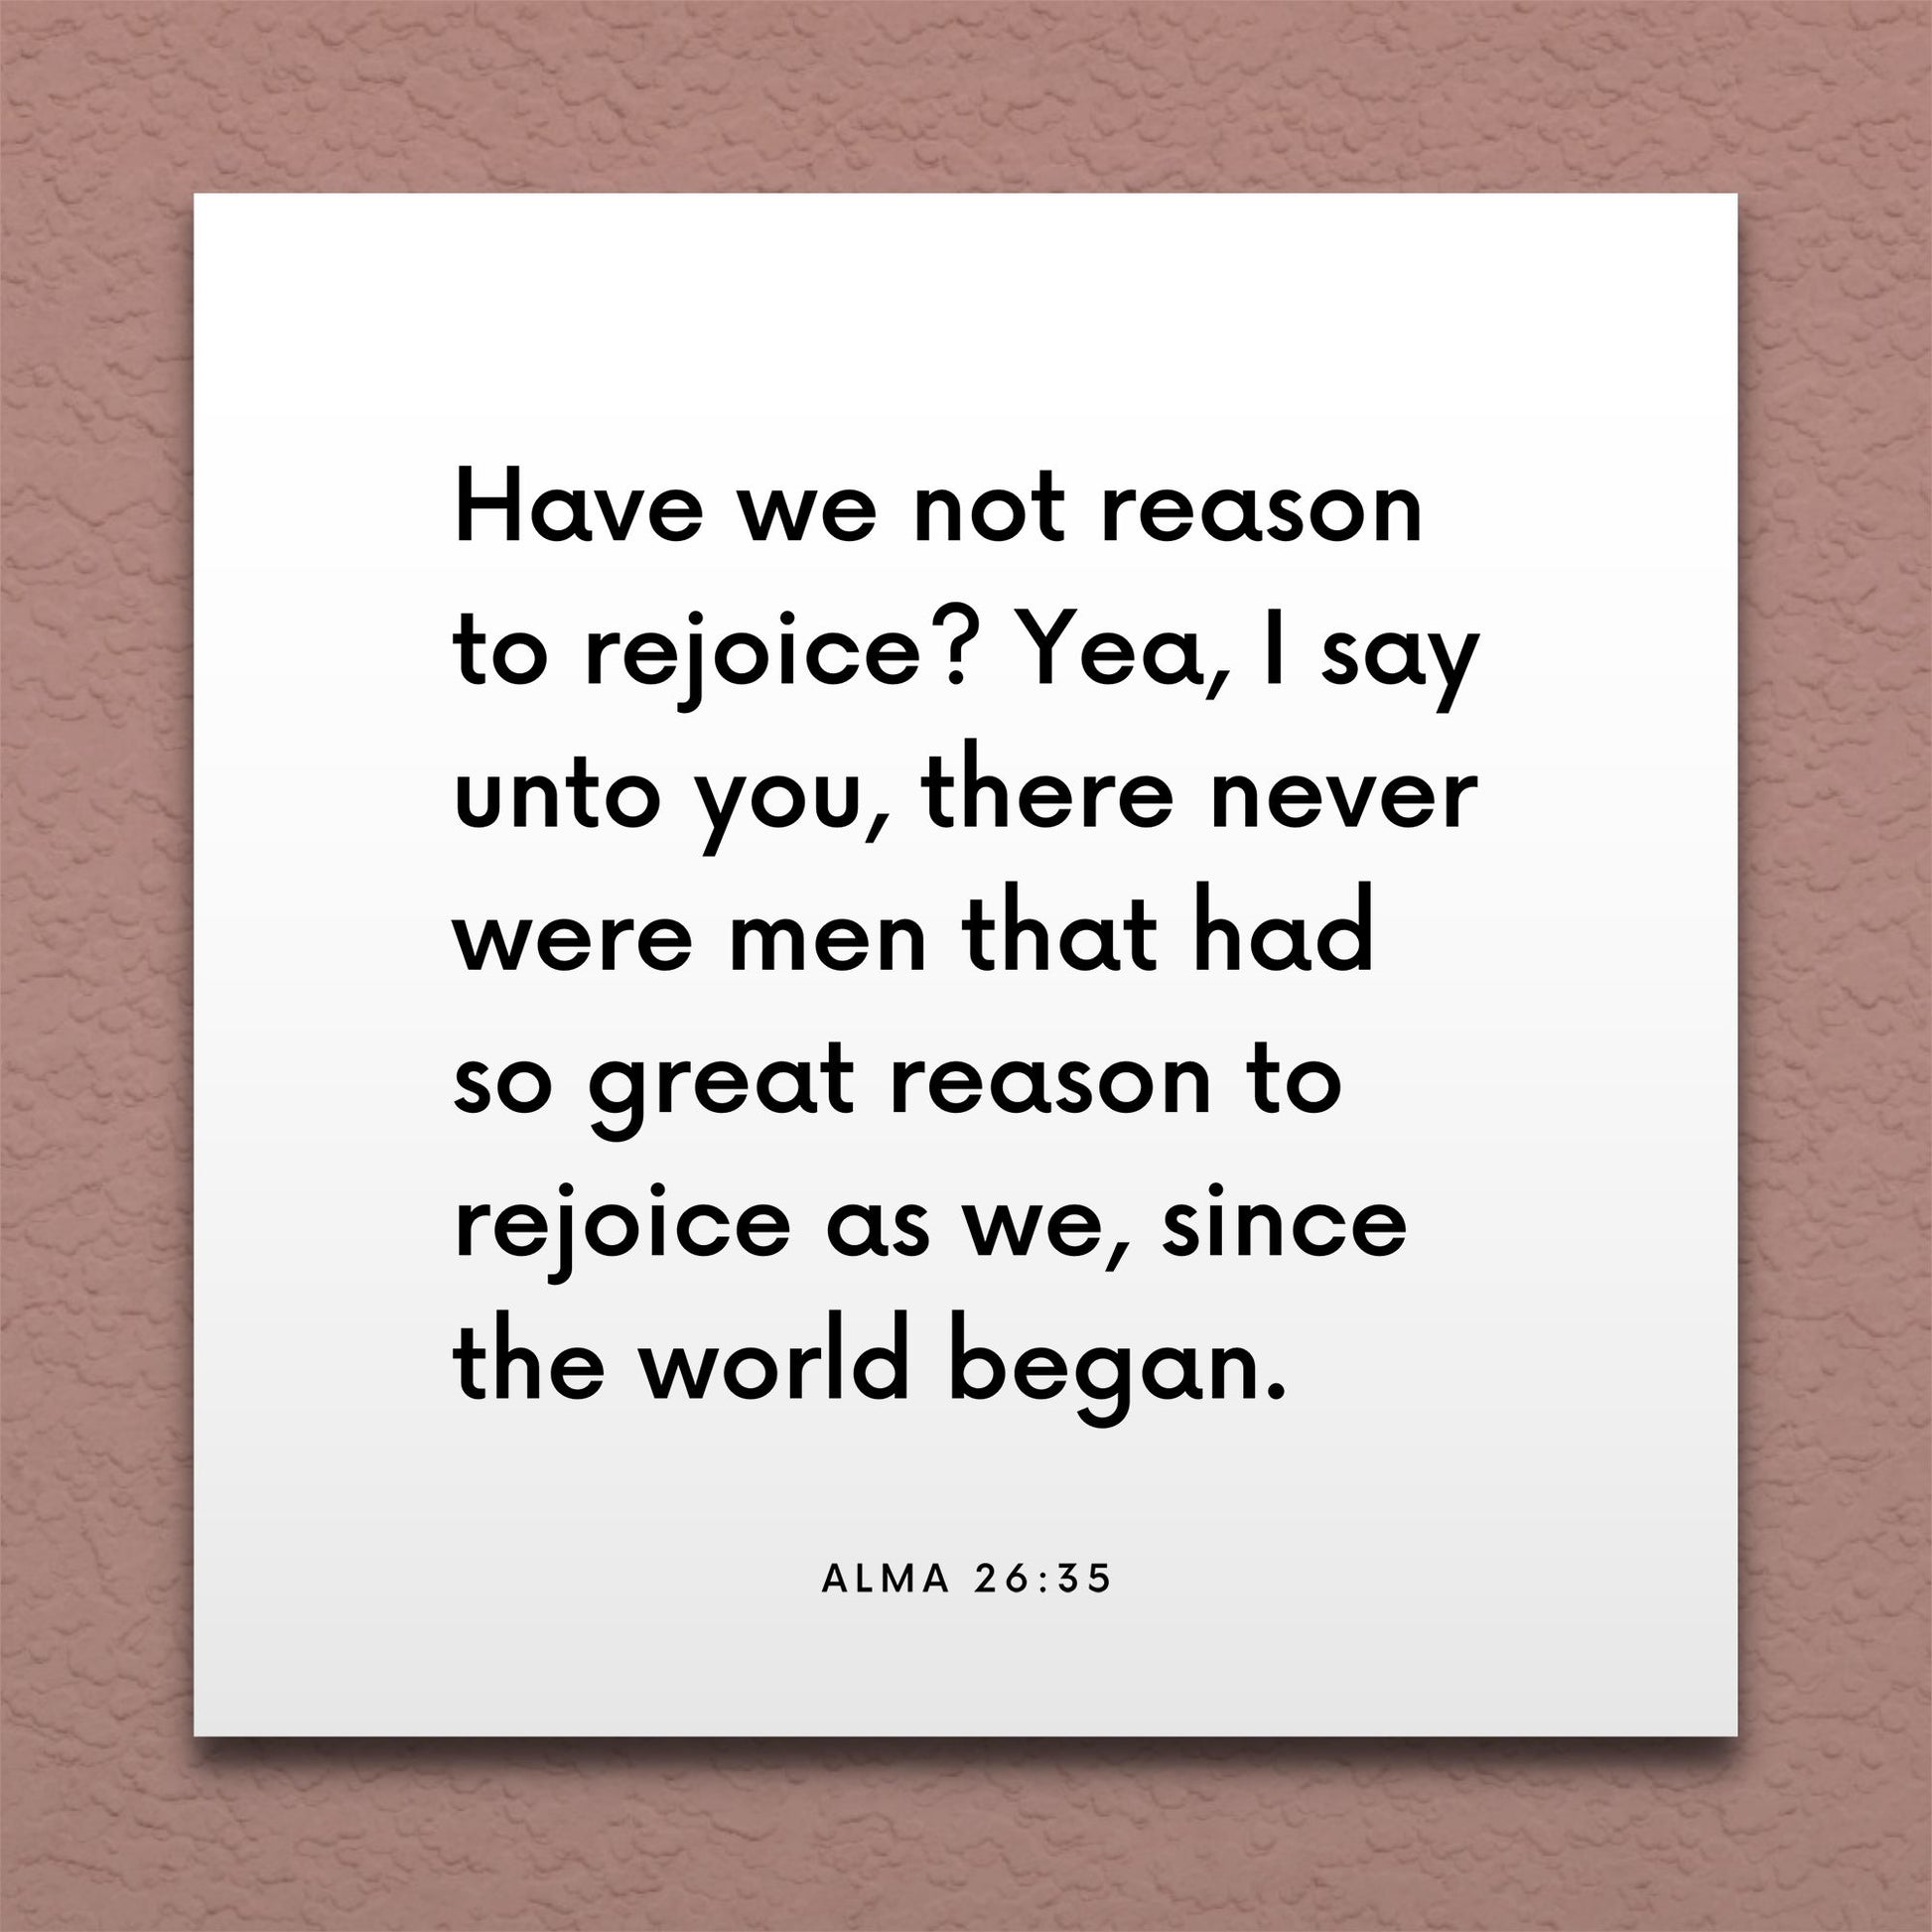 Wall-mounted scripture tile for Alma 26:35 - "Have we not reason to rejoice?"